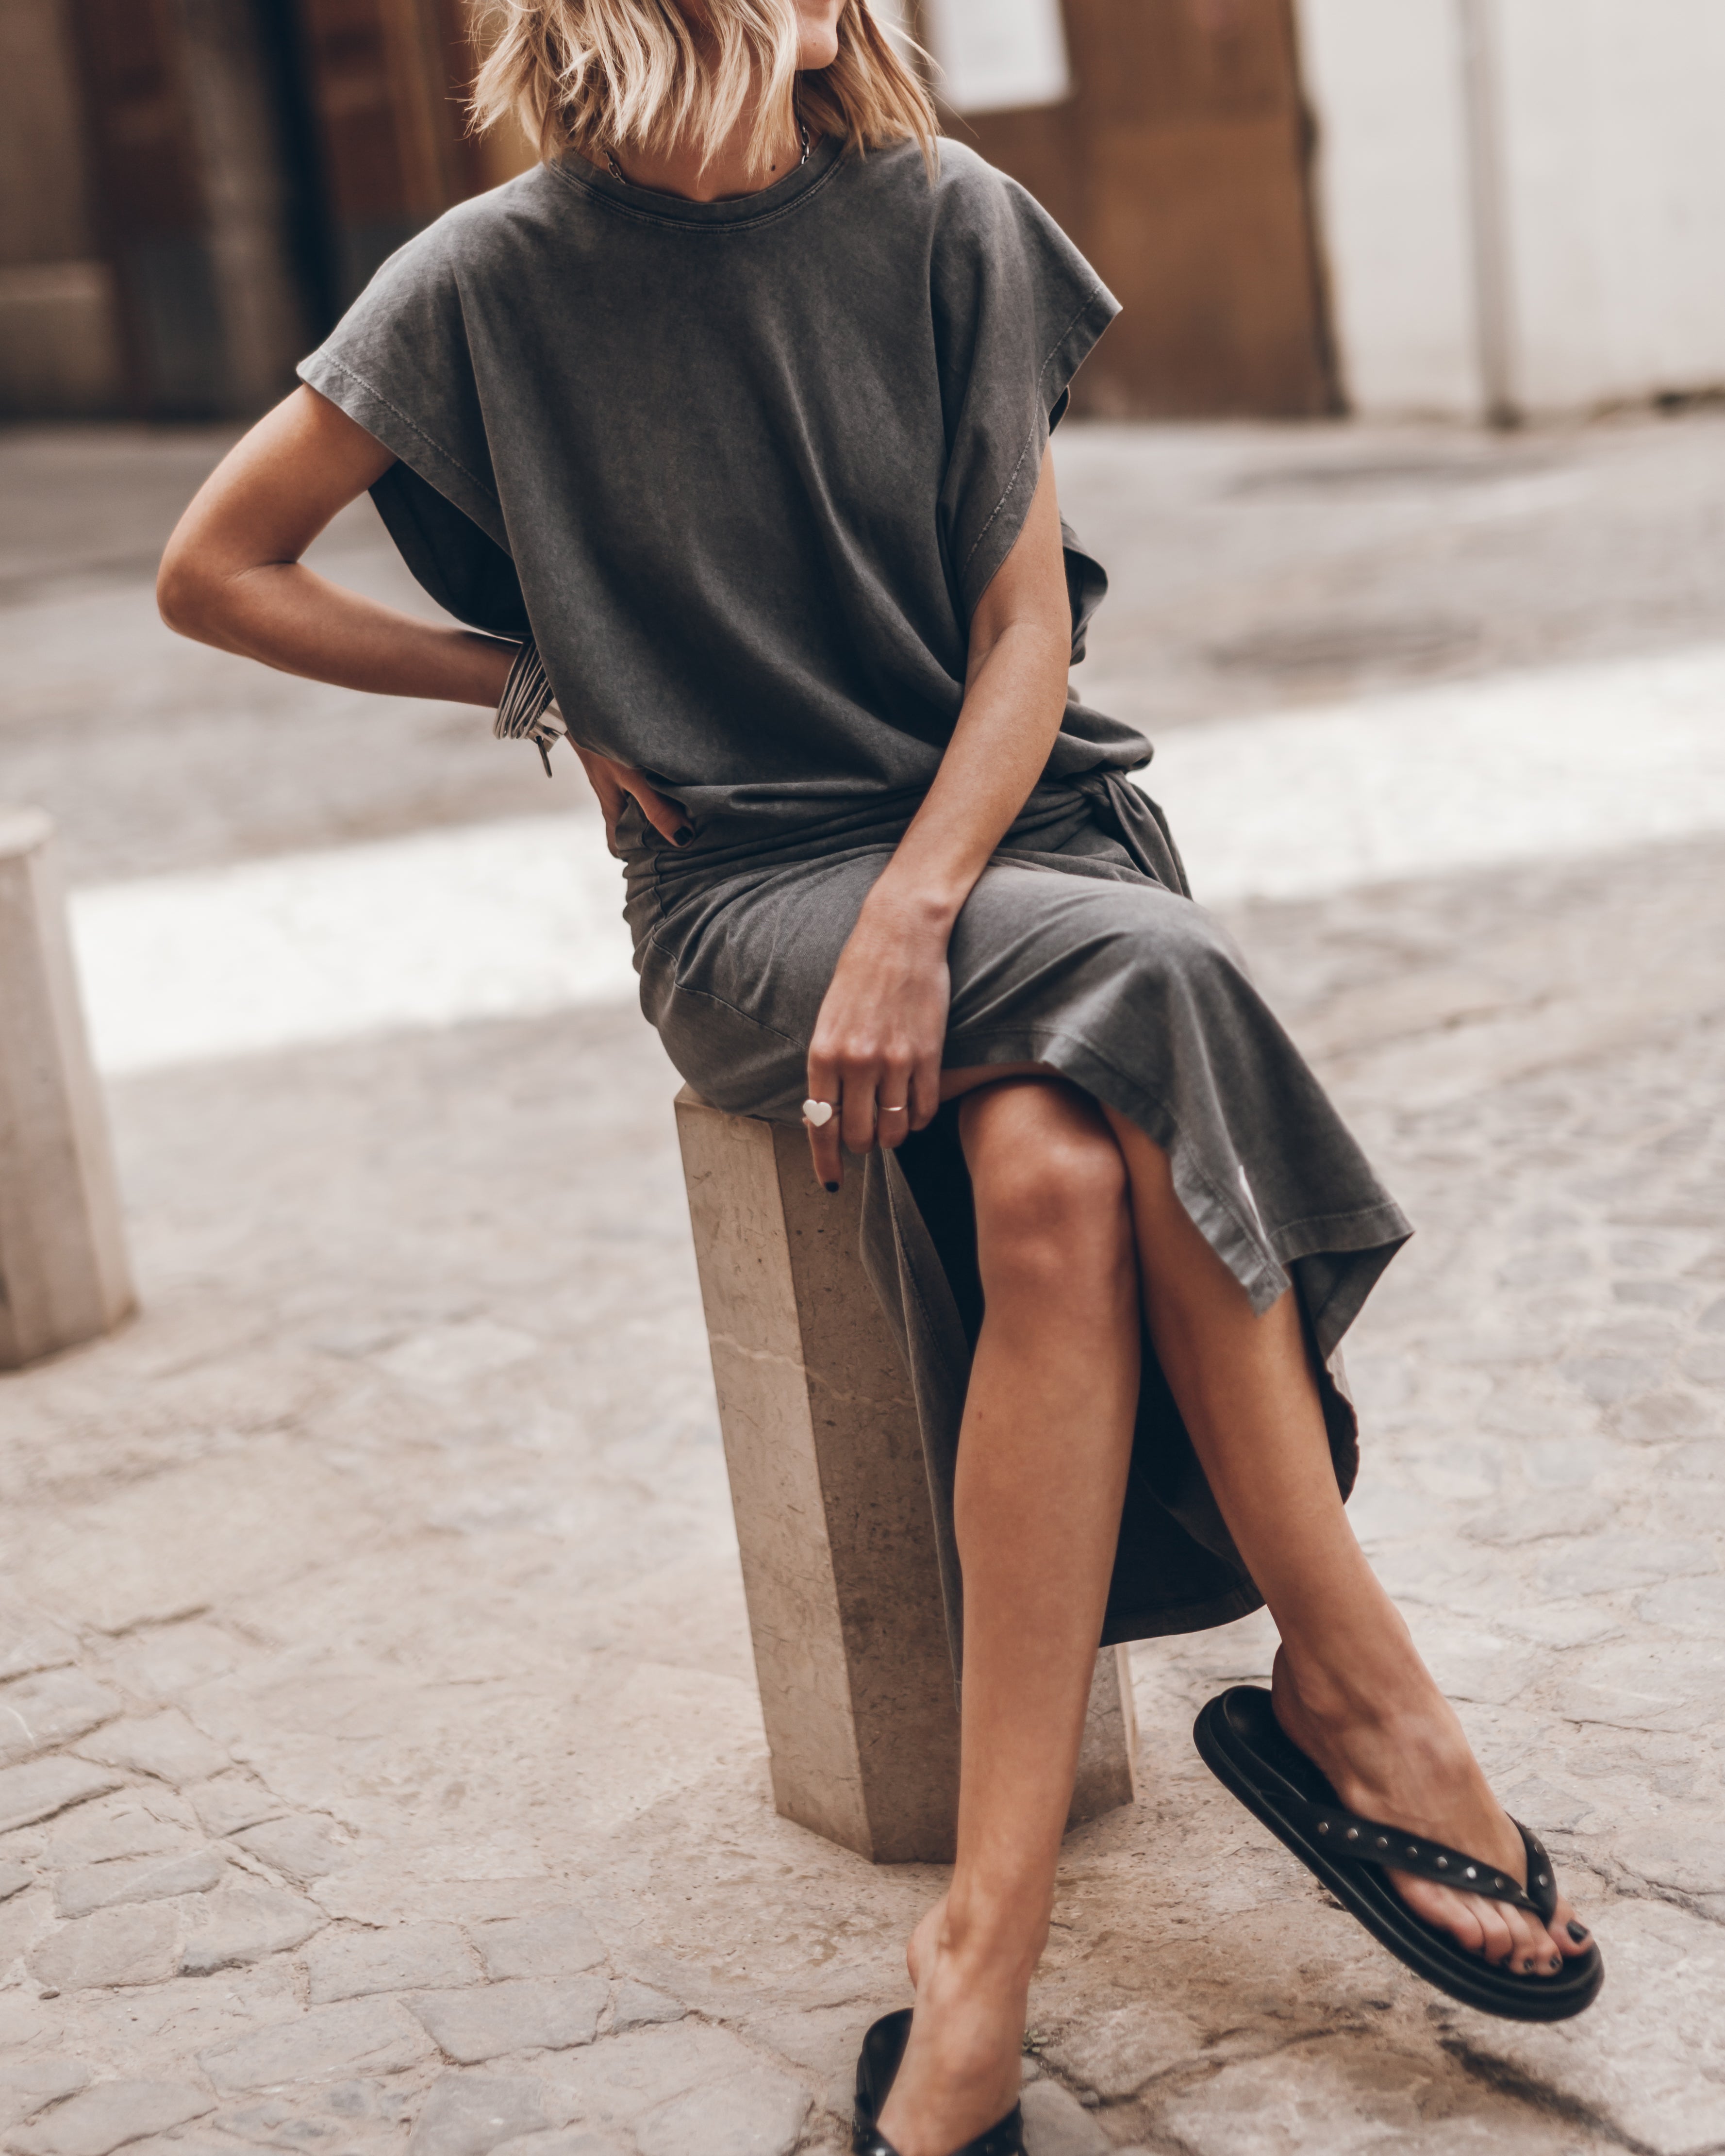 The Dark Faded Knotted Long Batwing Dress